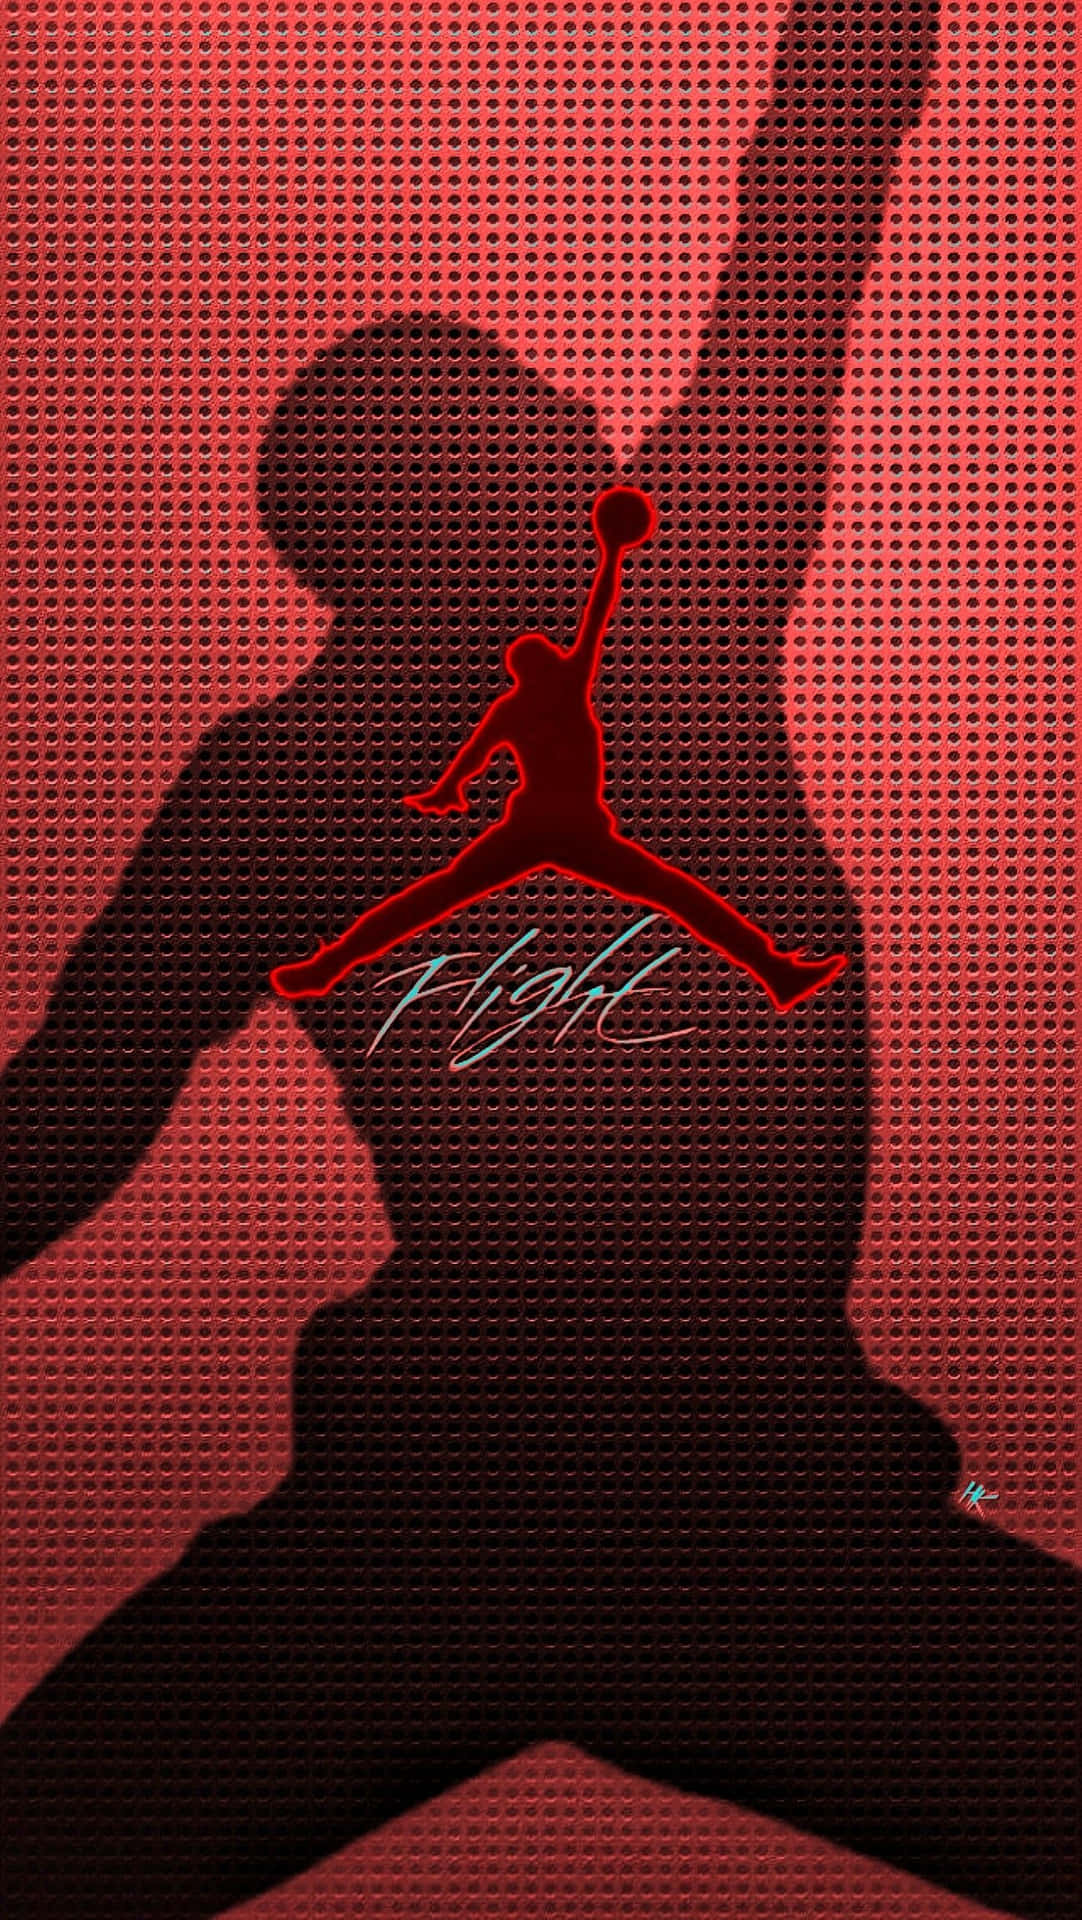 Enjoy the power of performance and style with the Jordan Logo Phone Wallpaper